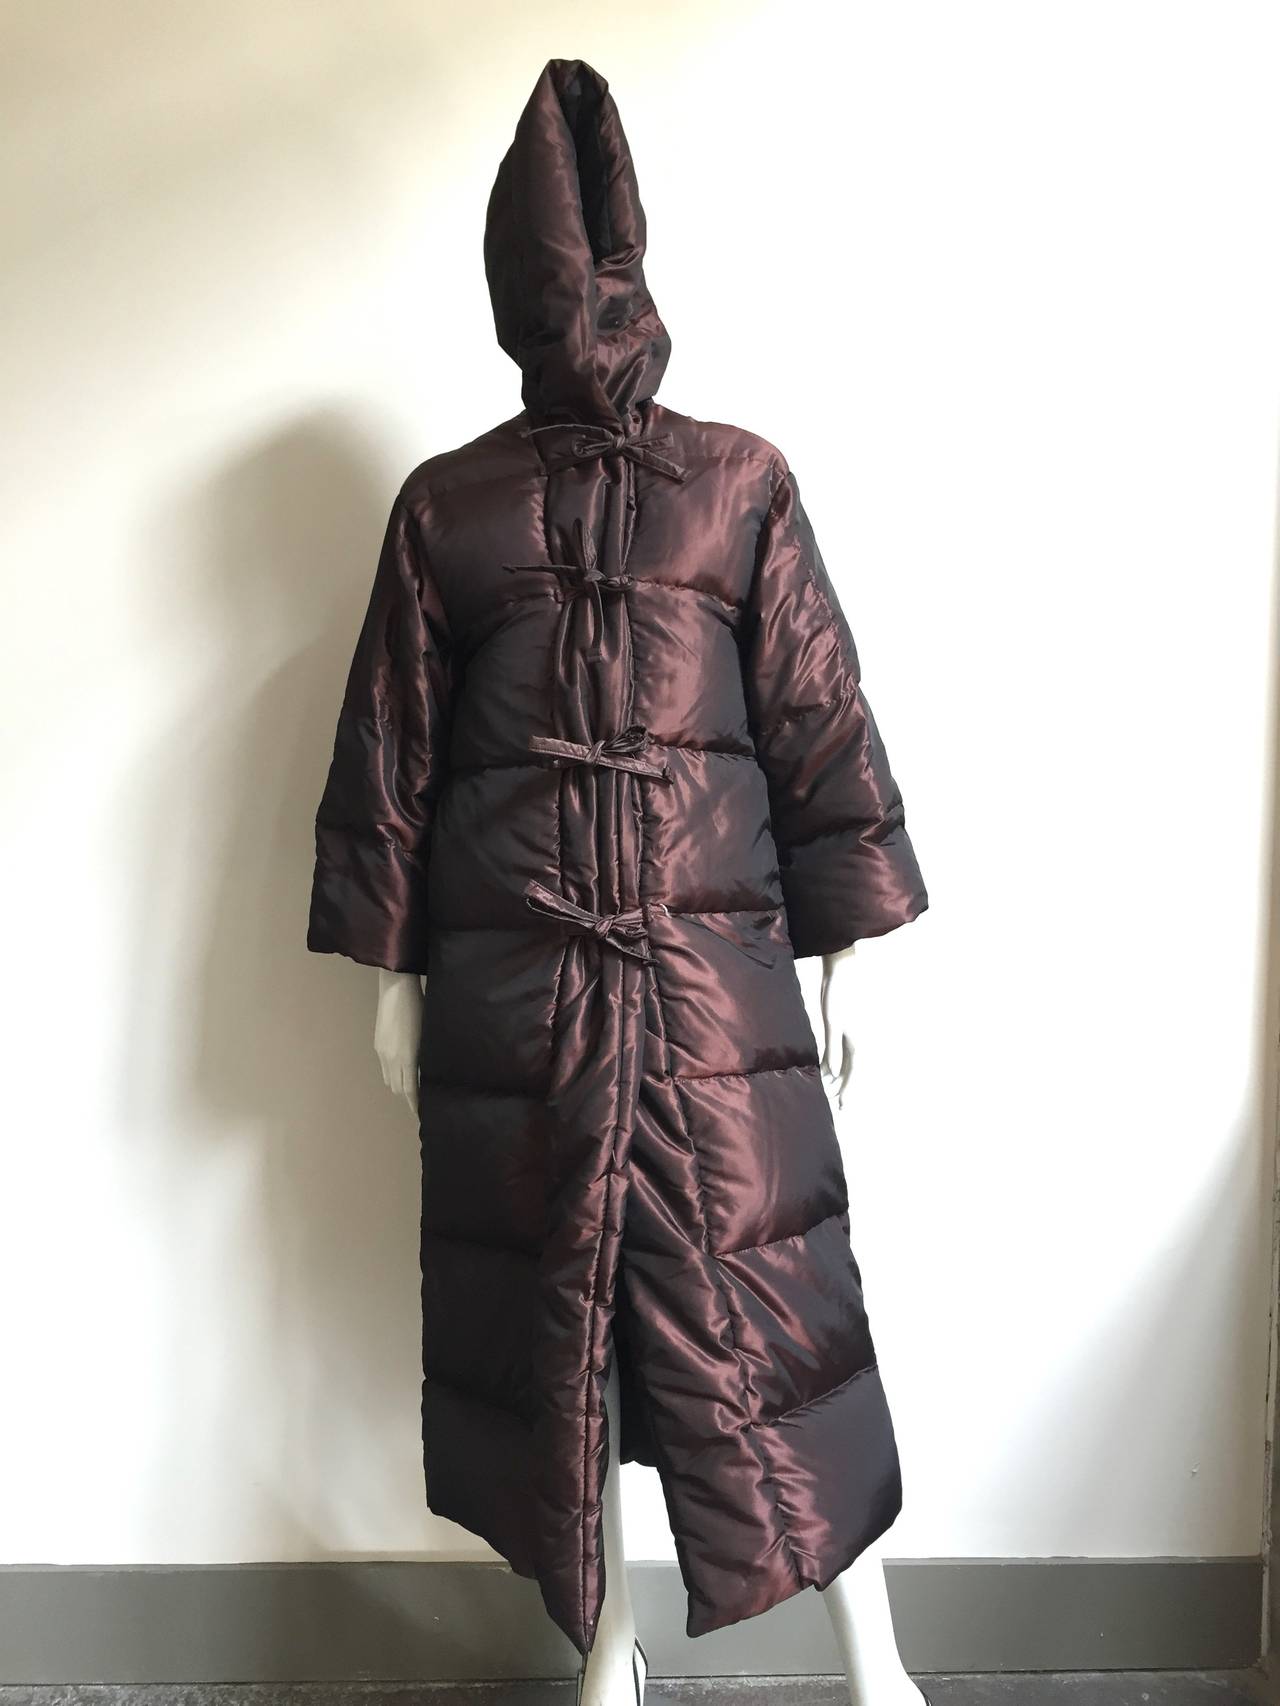 Bill Blass early 1980s metallic down coat with hood is a USA size 6.
Front zipper with 4 ties for that extra added Bill Blass touch. Down filled for that extra cold night. 
Measurements are:
21